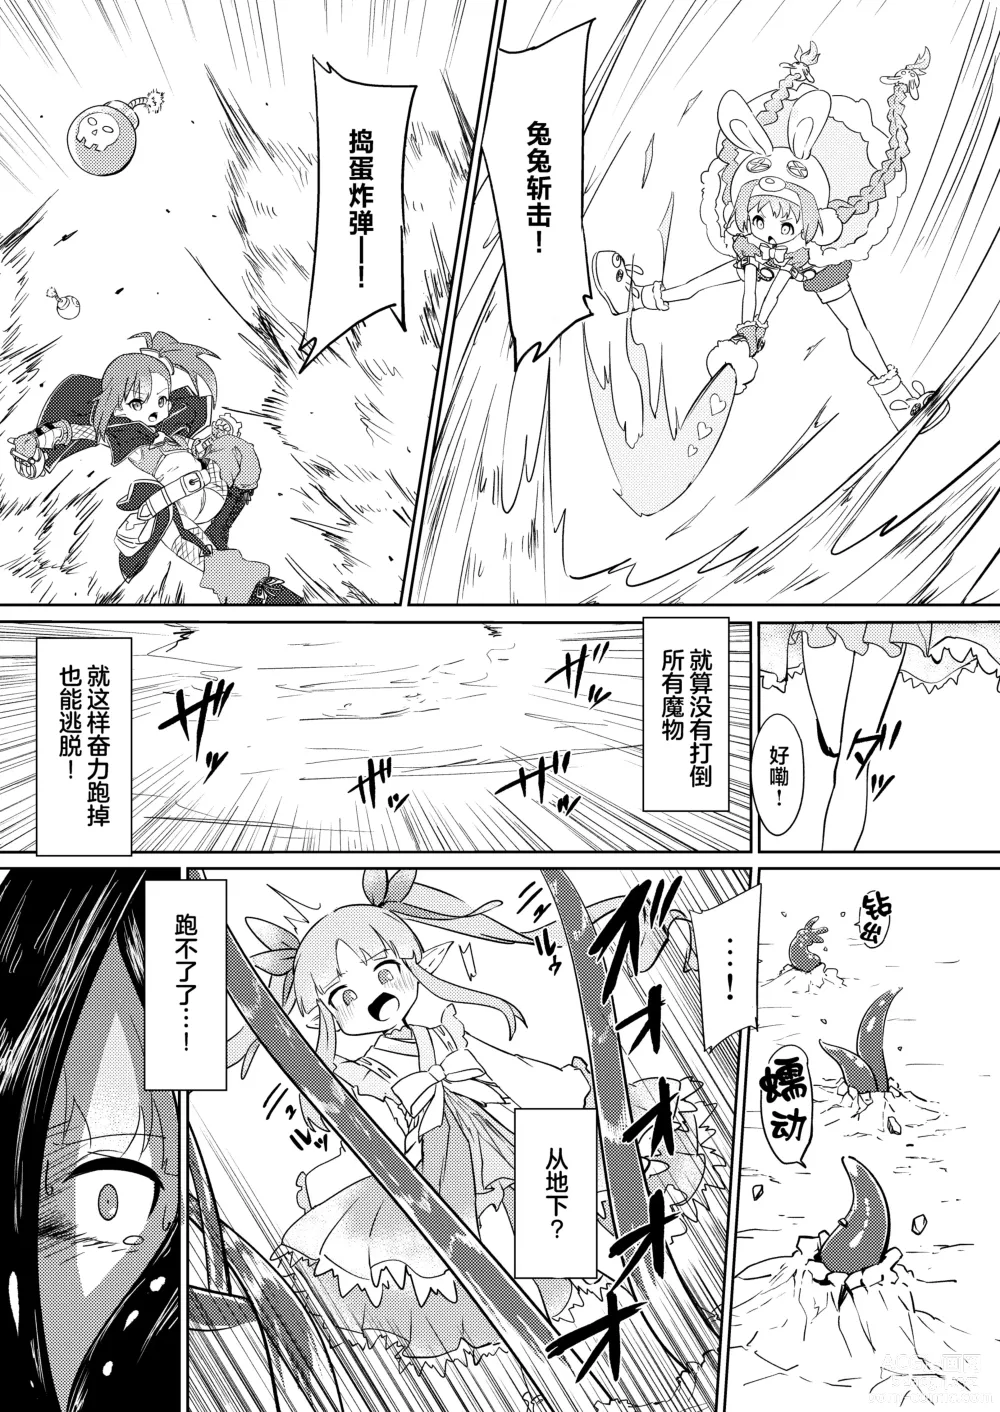 Page 4 of doujinshi Tentacle Defeat Little Lyrical Edition Prototype